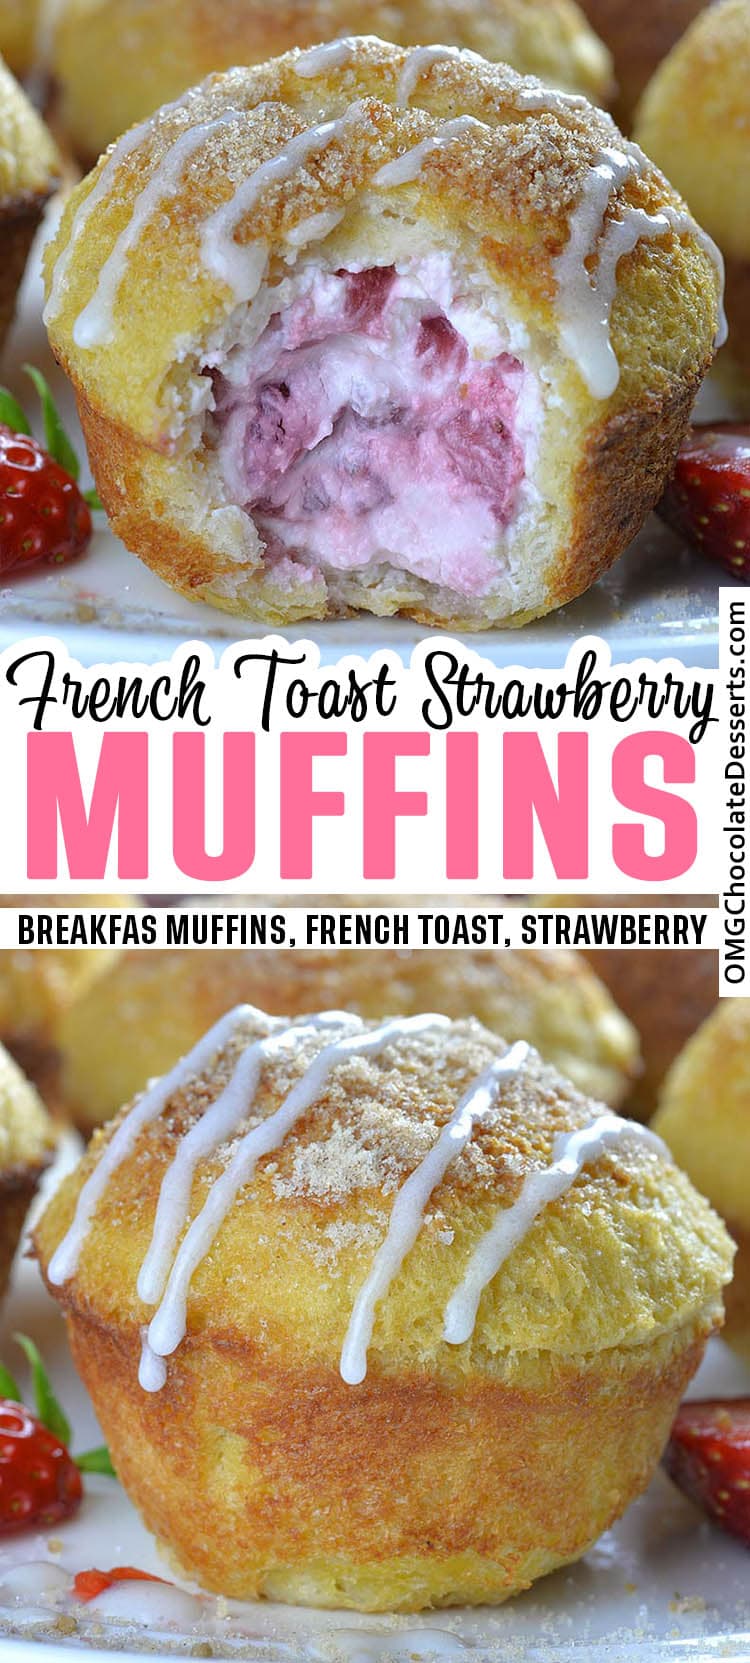 Strawberry French Toast Muffins